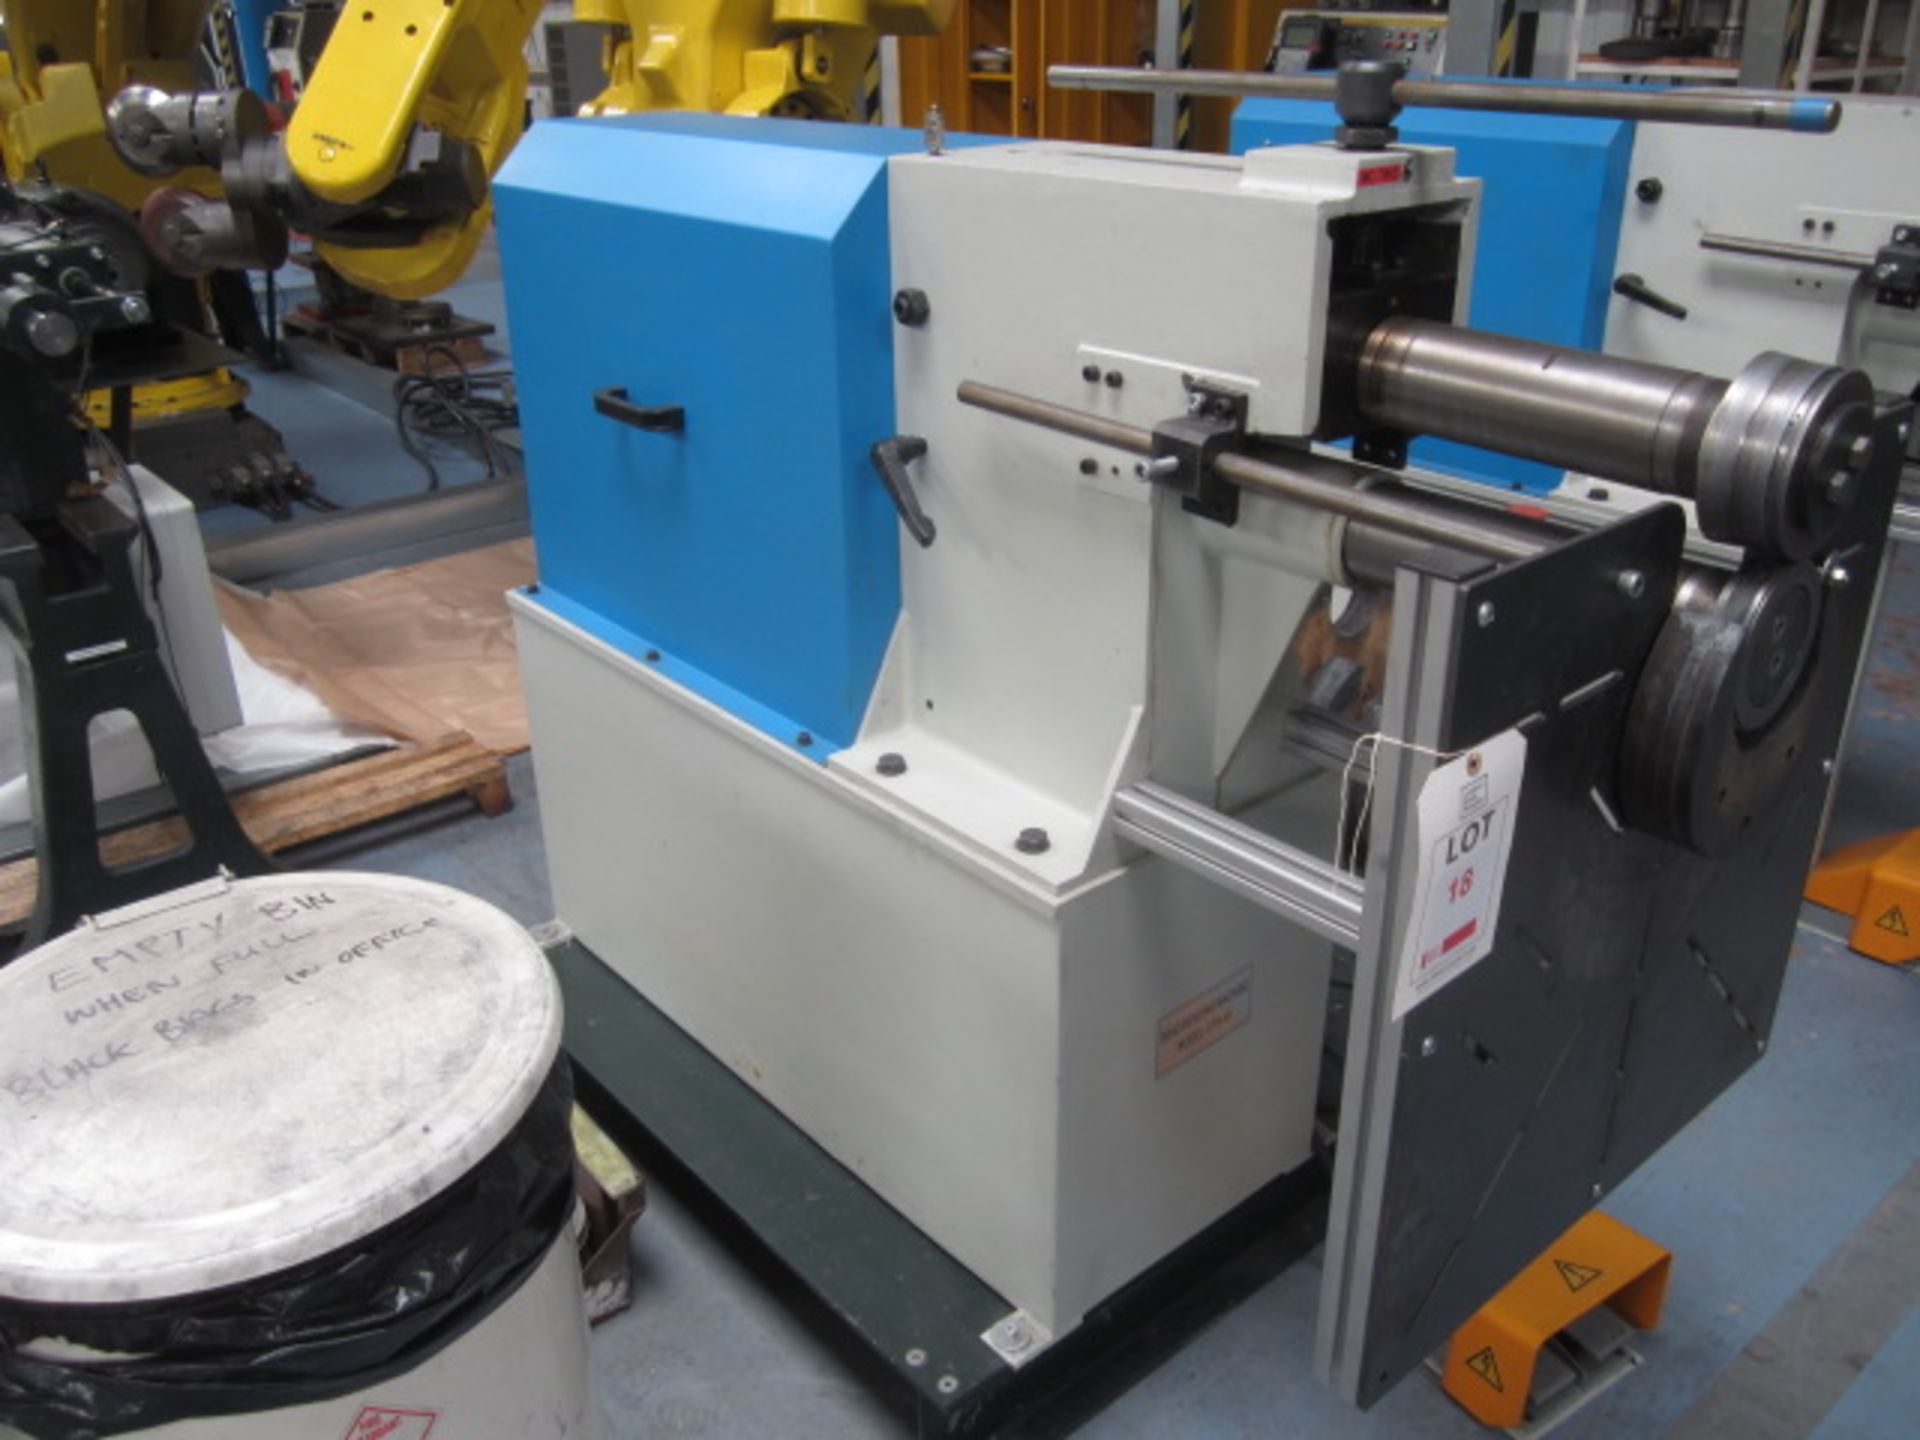 Tri-Union bead bending machine, Model: ETB-40, s/n: A140 52158 (2014) with wander foot control. A - Image 2 of 5